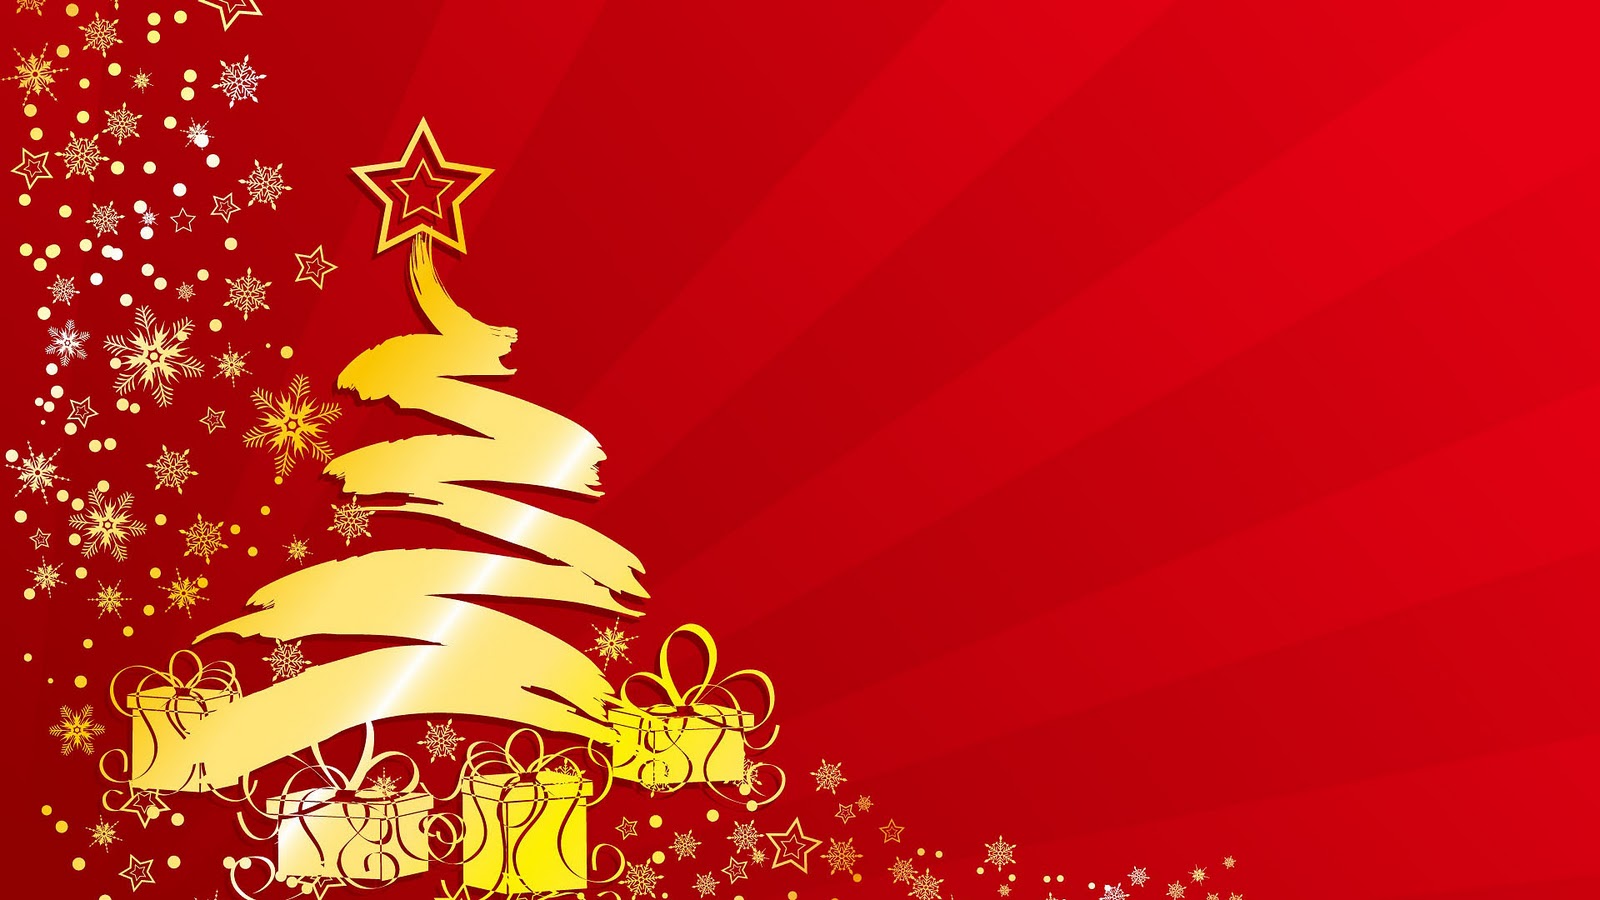 Free Christmas Background Images, Download Free Christmas Background Images png images, Free ClipArts on Clipart Library